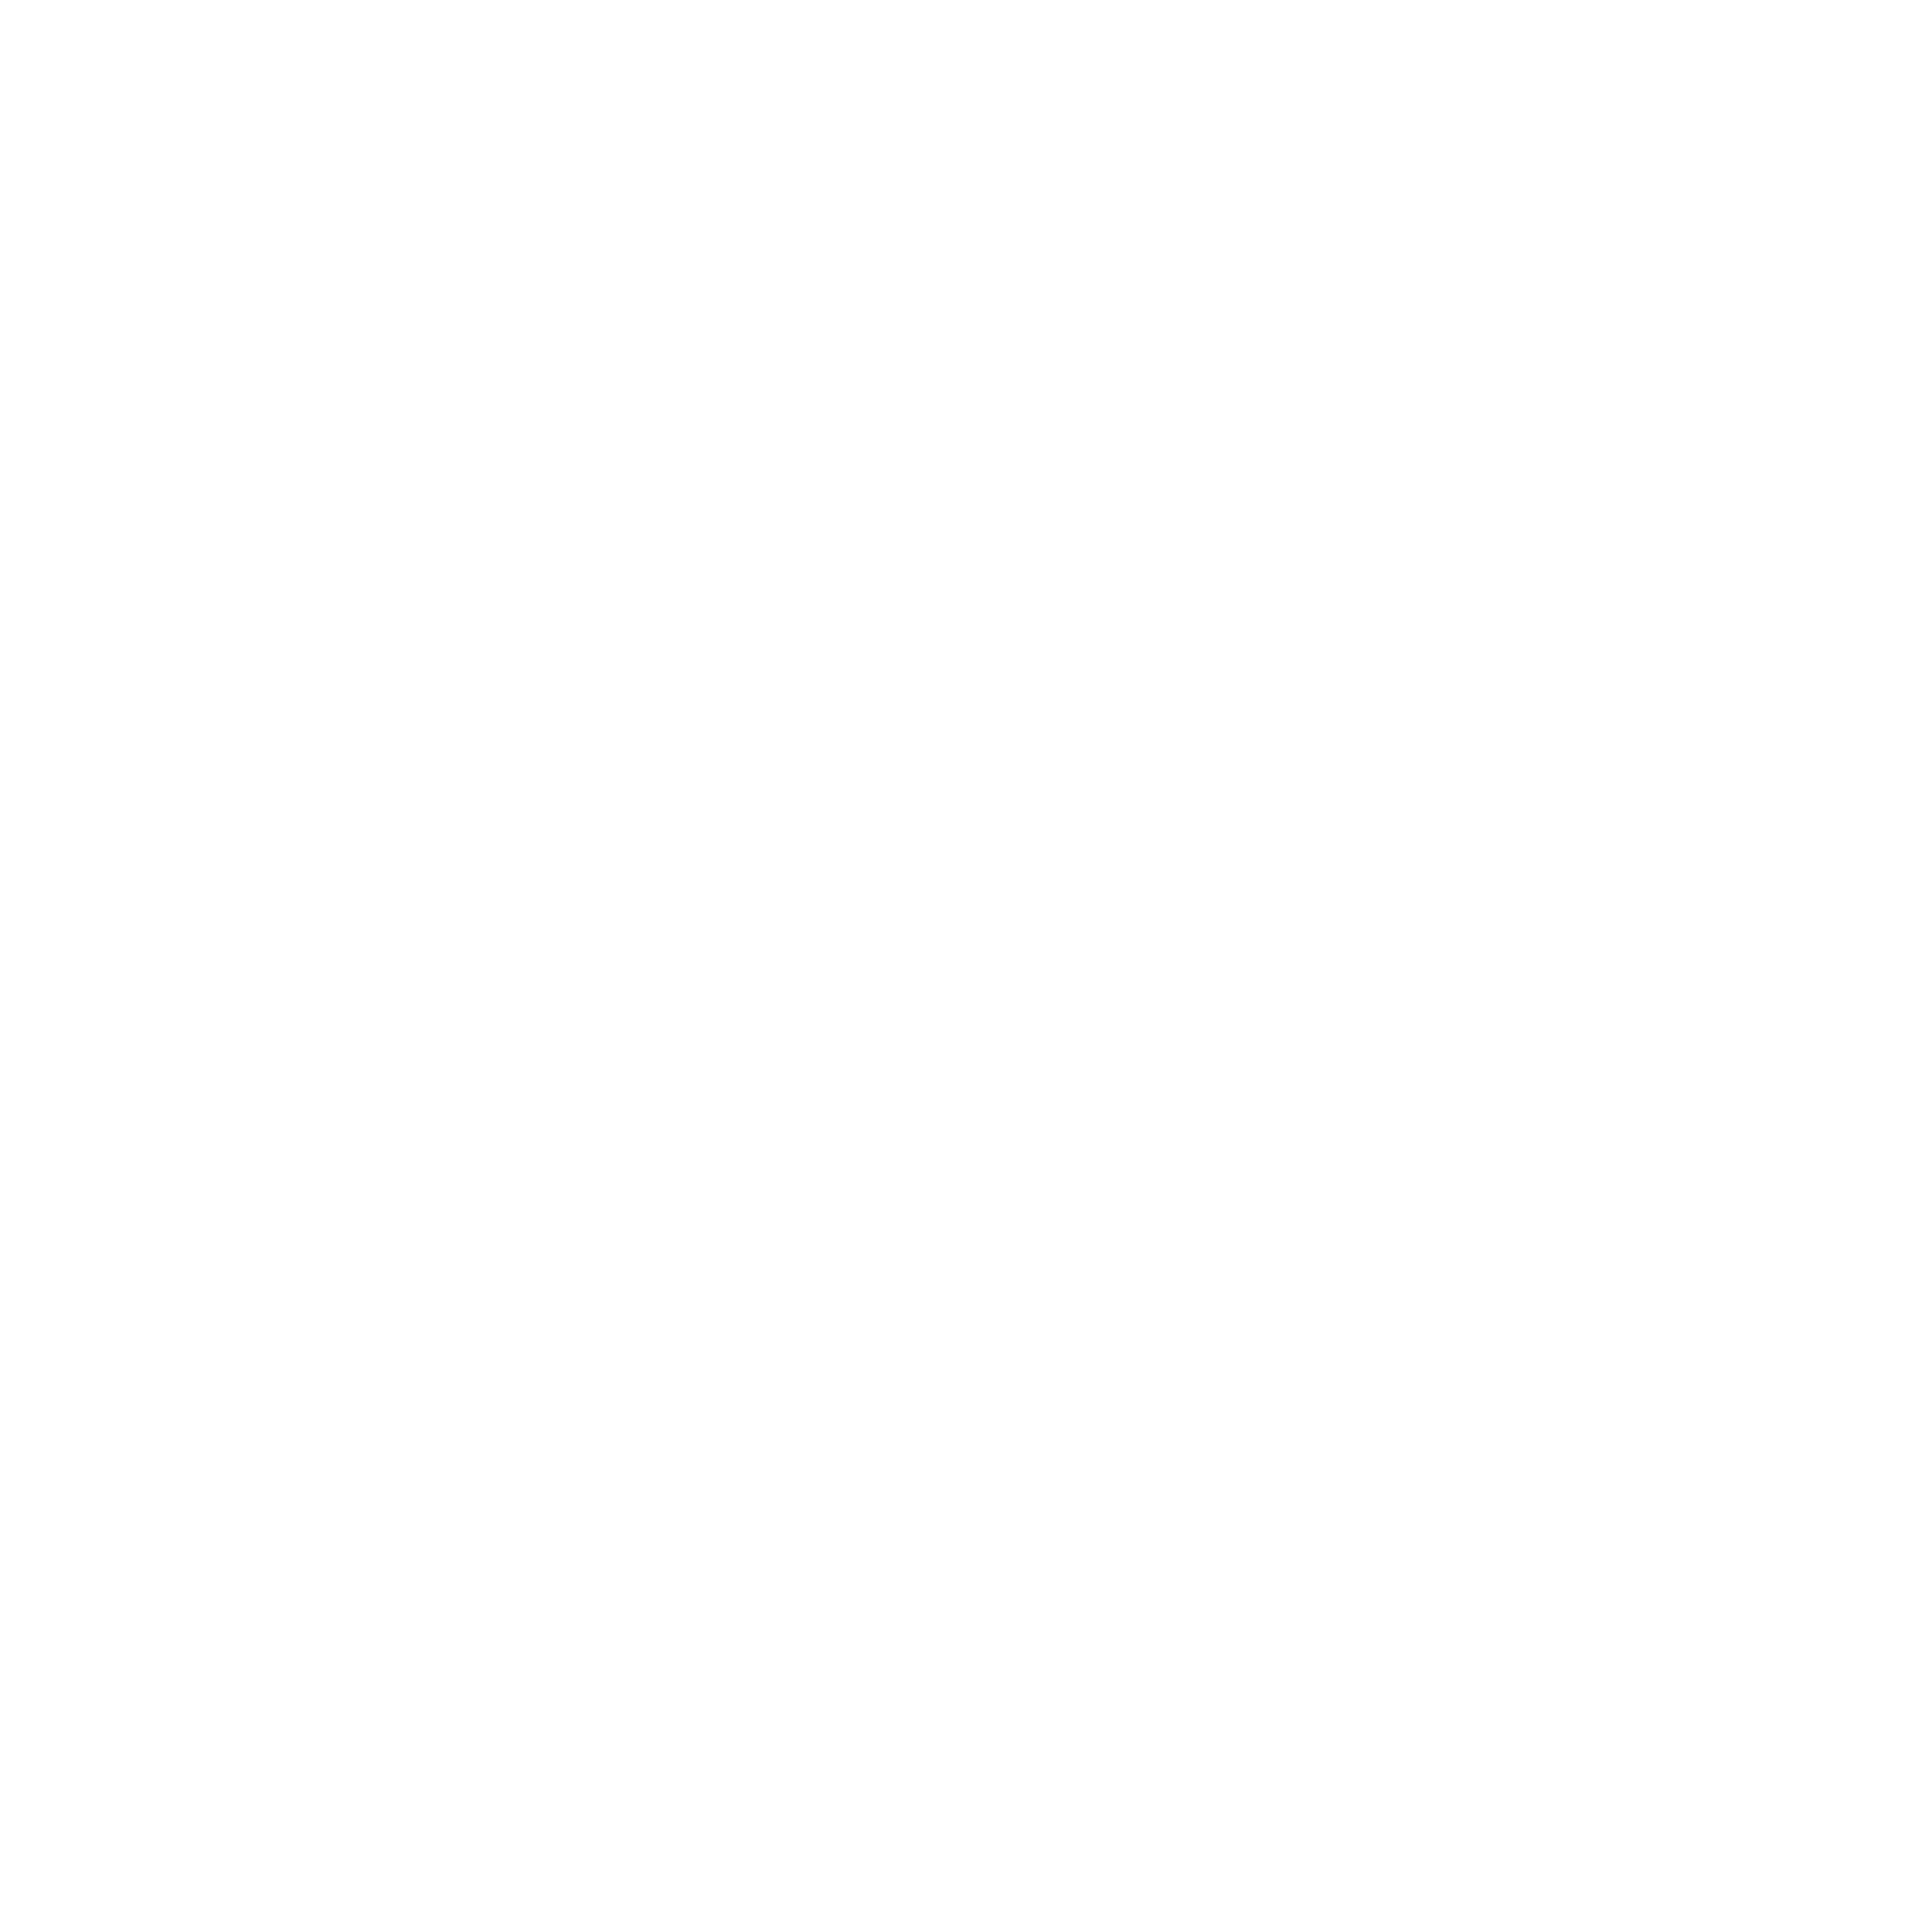 A Journey Into The Unknown